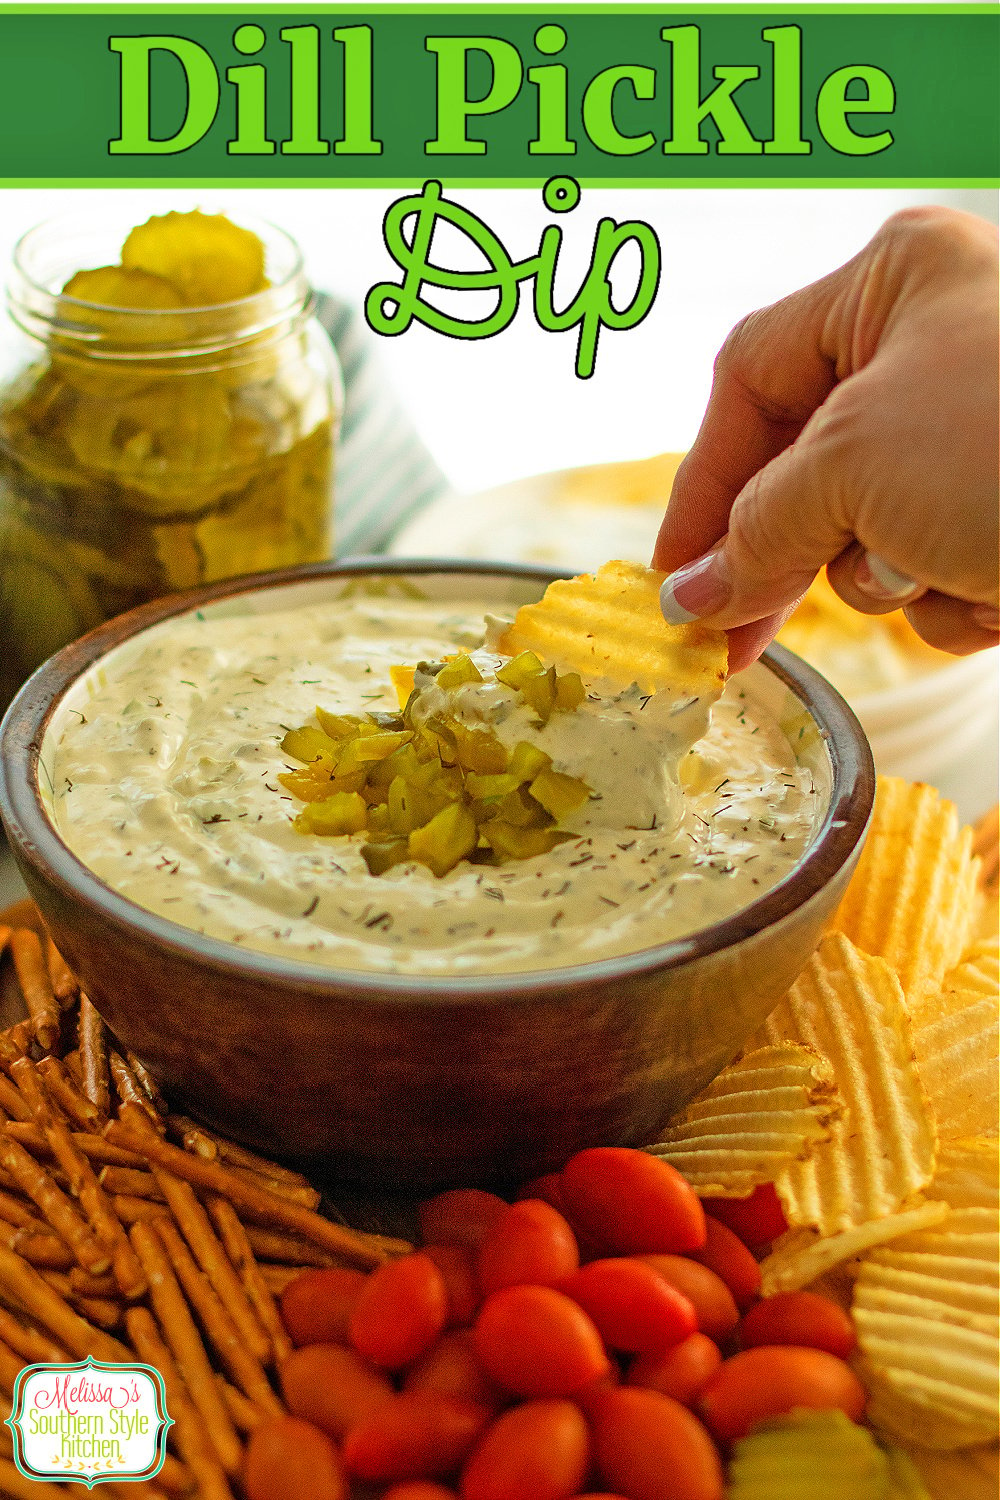 Serve this Dill Pickle Dip with potato chips, crackers, pretzels, vegetables or crostini for dipping #dillpickles #dillpickledip #easypicklerecipes #bestdiprecipes #dilldip #southerndiprecipes #partyrecipes